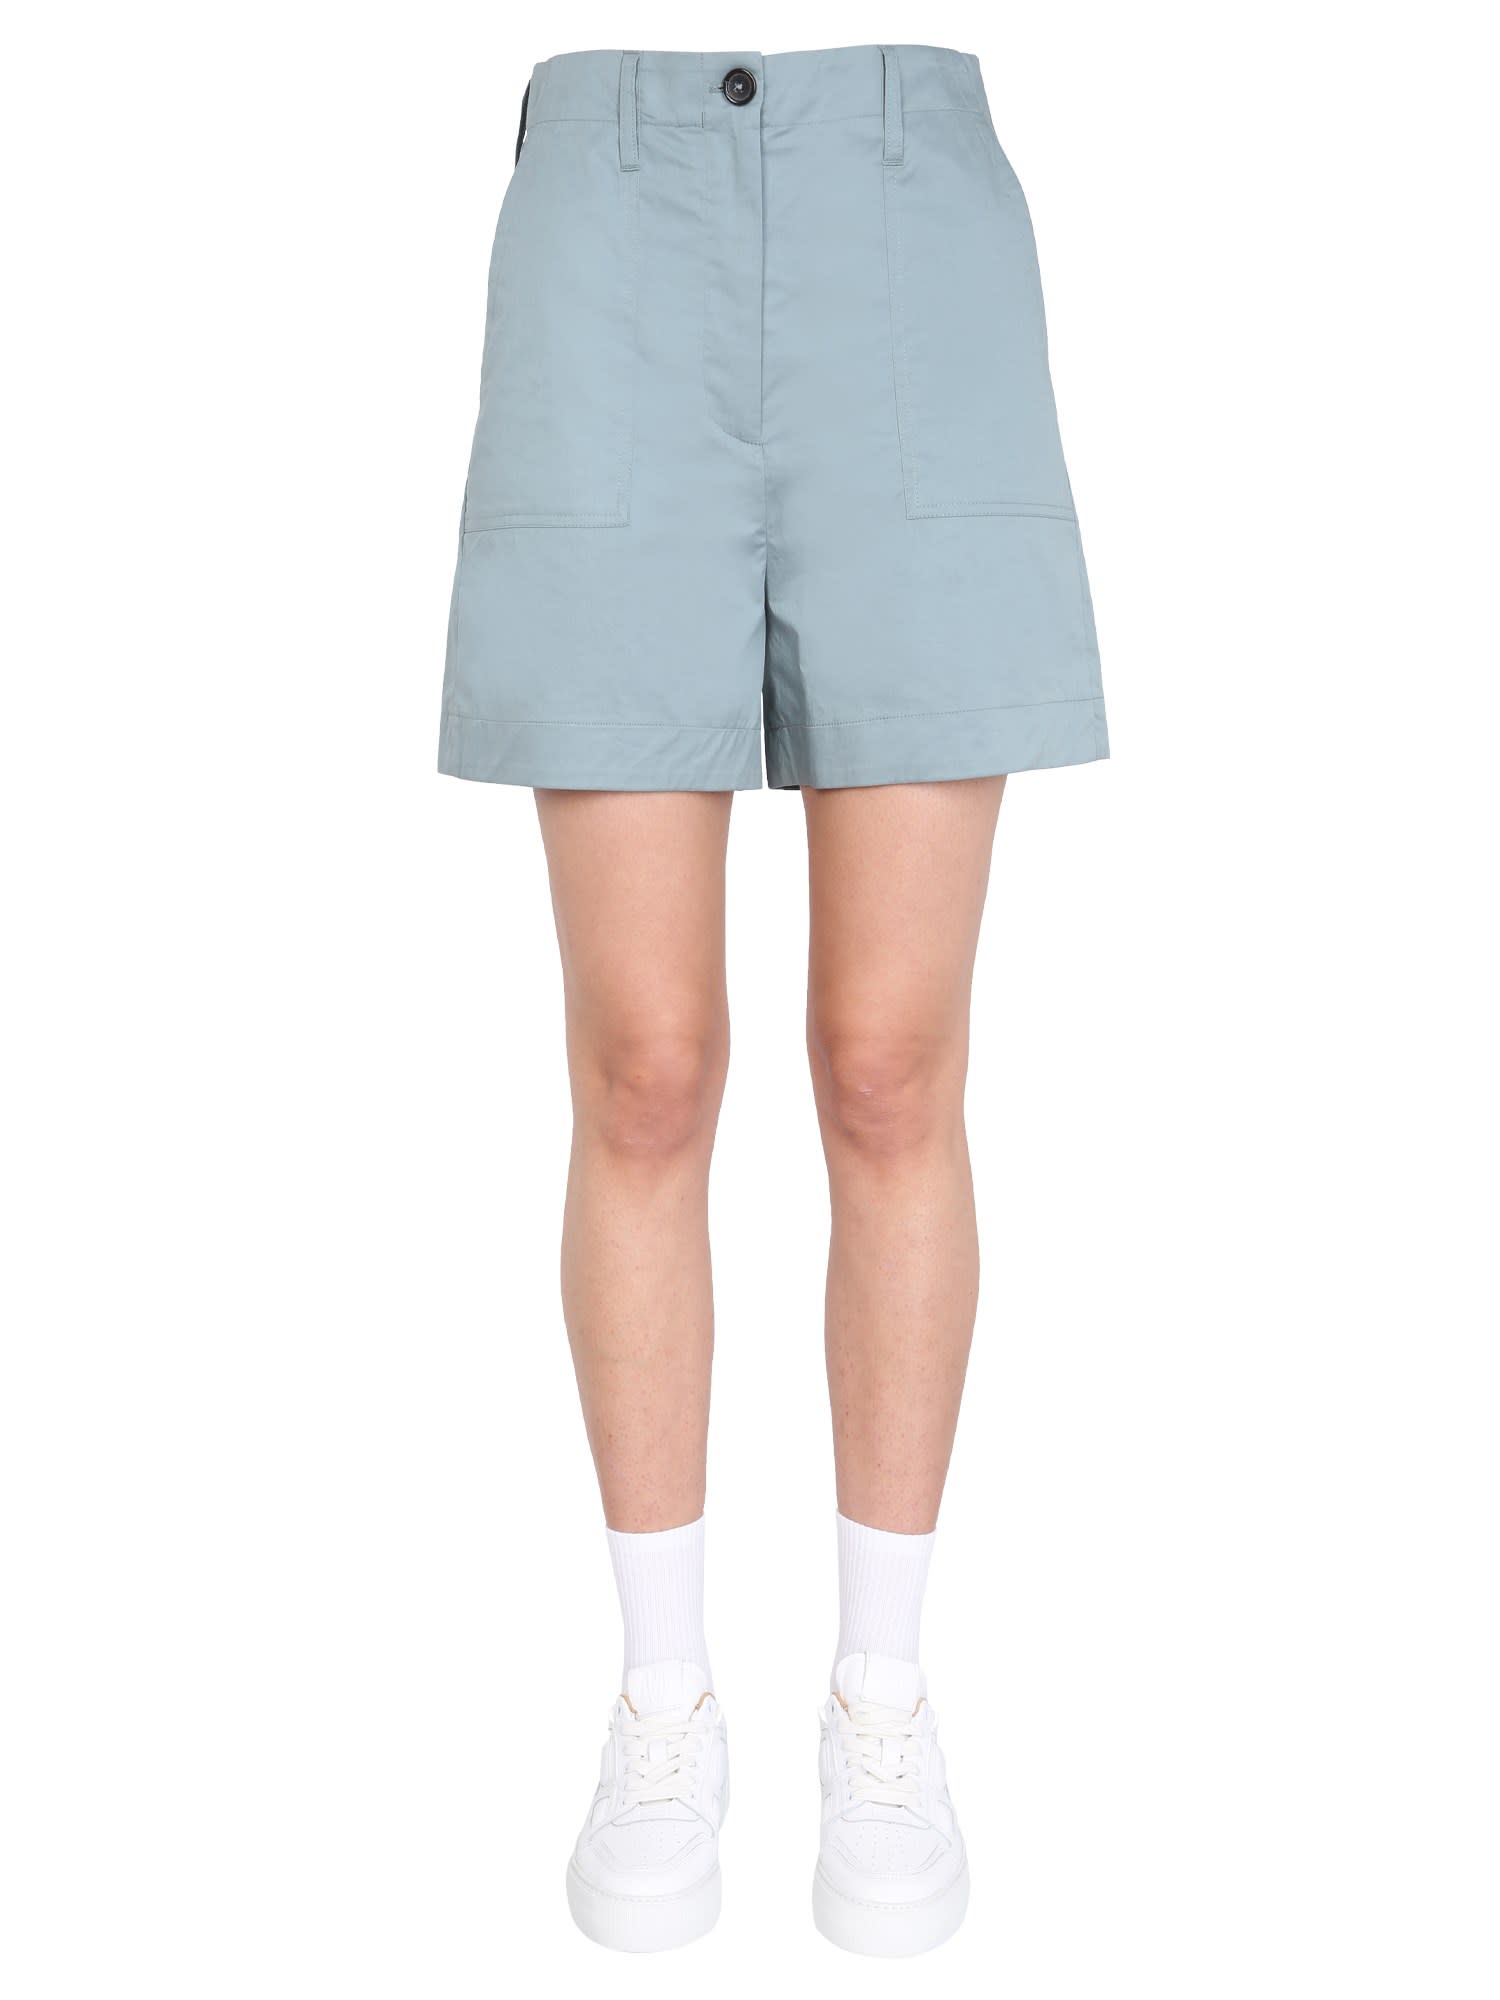 PS by Paul Smith Cotton Shorts